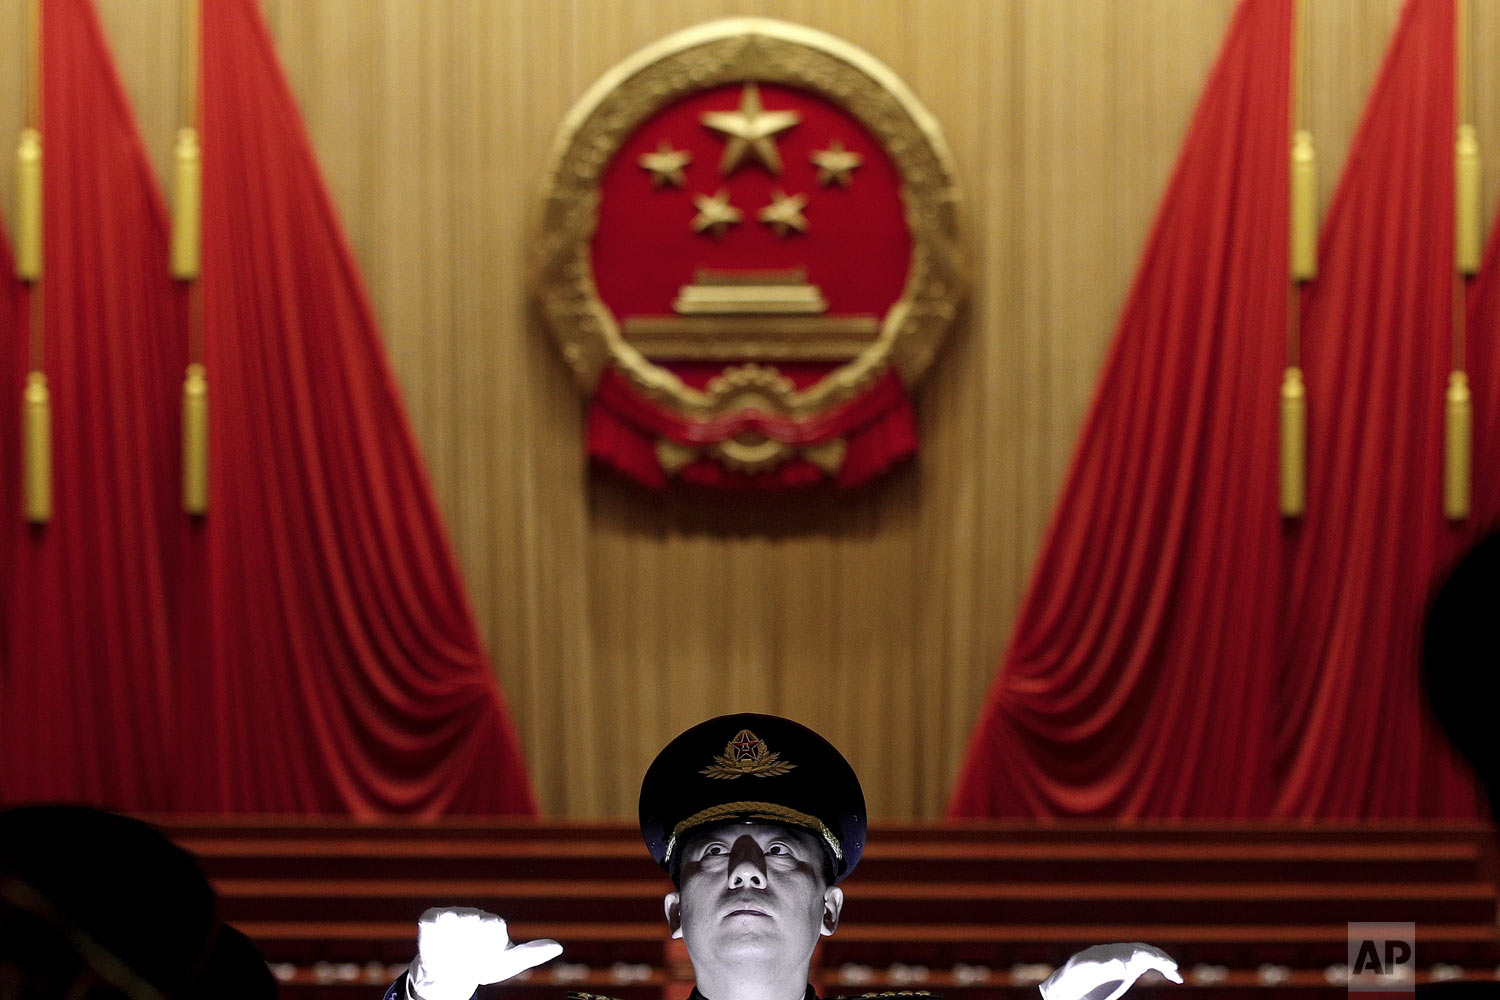  A military conductor leads band members during a rehearsal for the opening session of the China's National People's Congress at the Great Hall of the People in Beijing, Tuesday, March 5, 2019. (AP Photo/Andy Wong) 